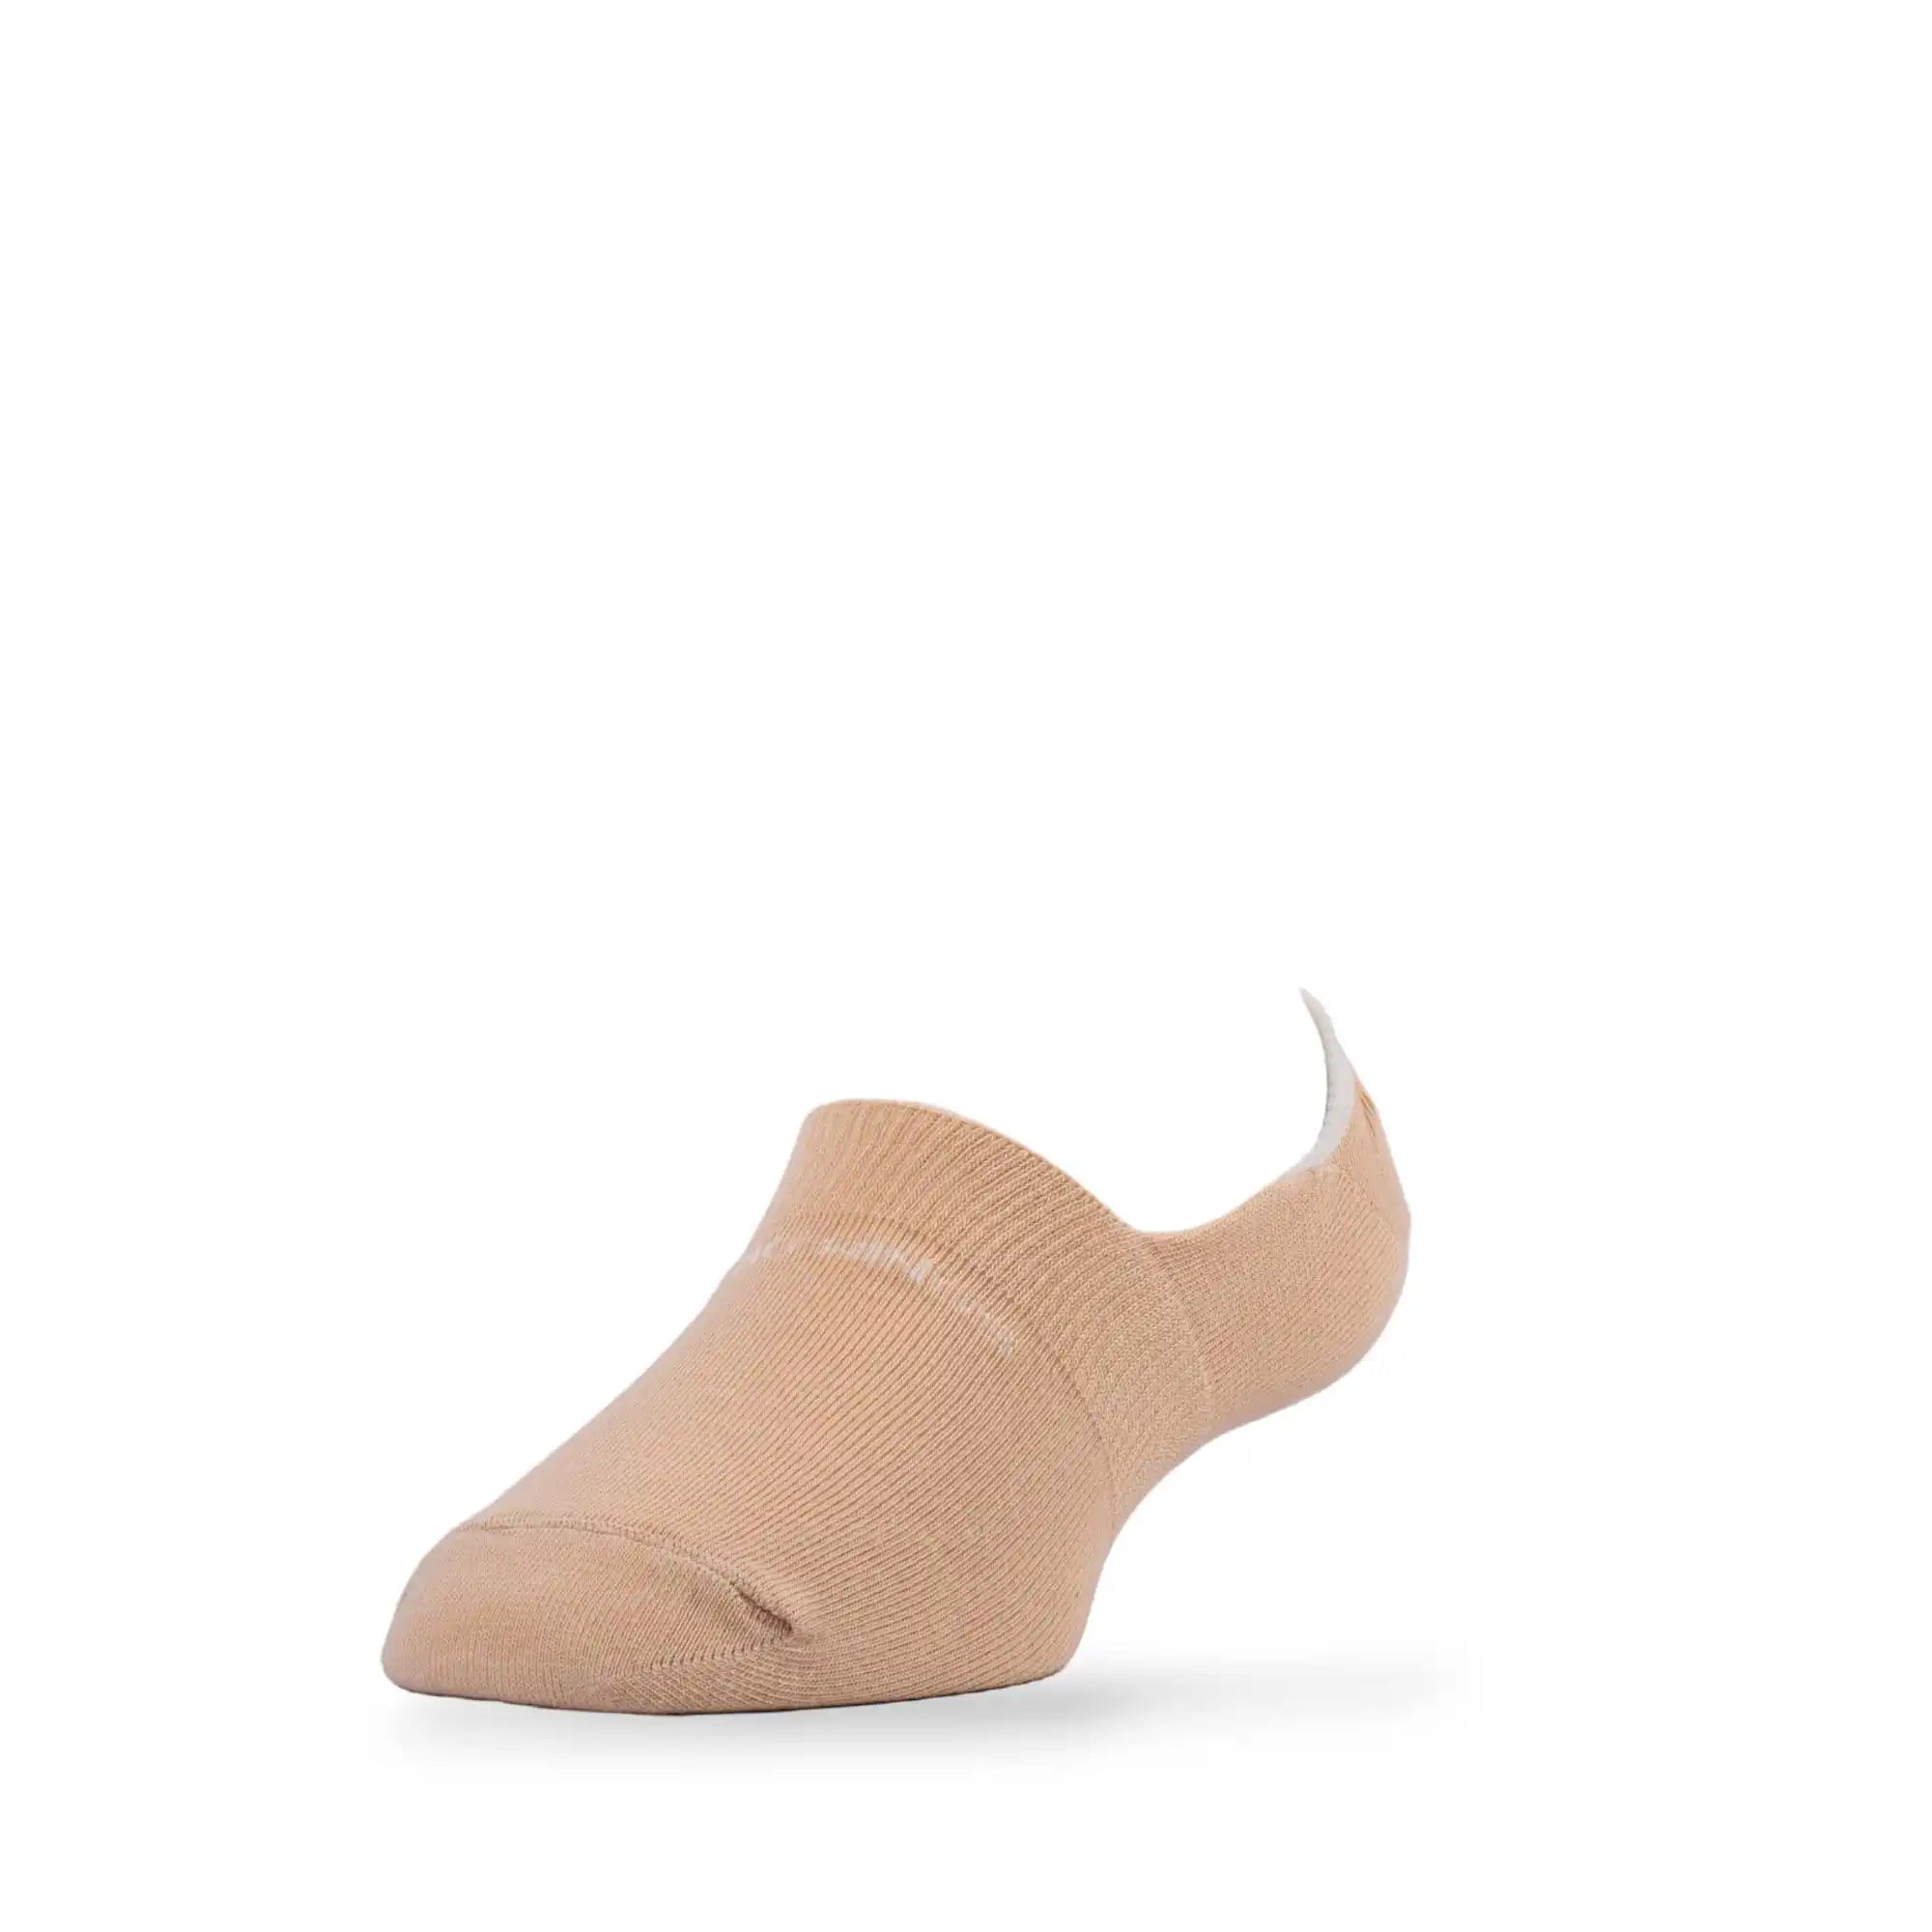 Young Wings Women's LT.Beige Colour Cotton Fabric Solid No-Show Socks - Pack of 5, Style no. 9001-W1